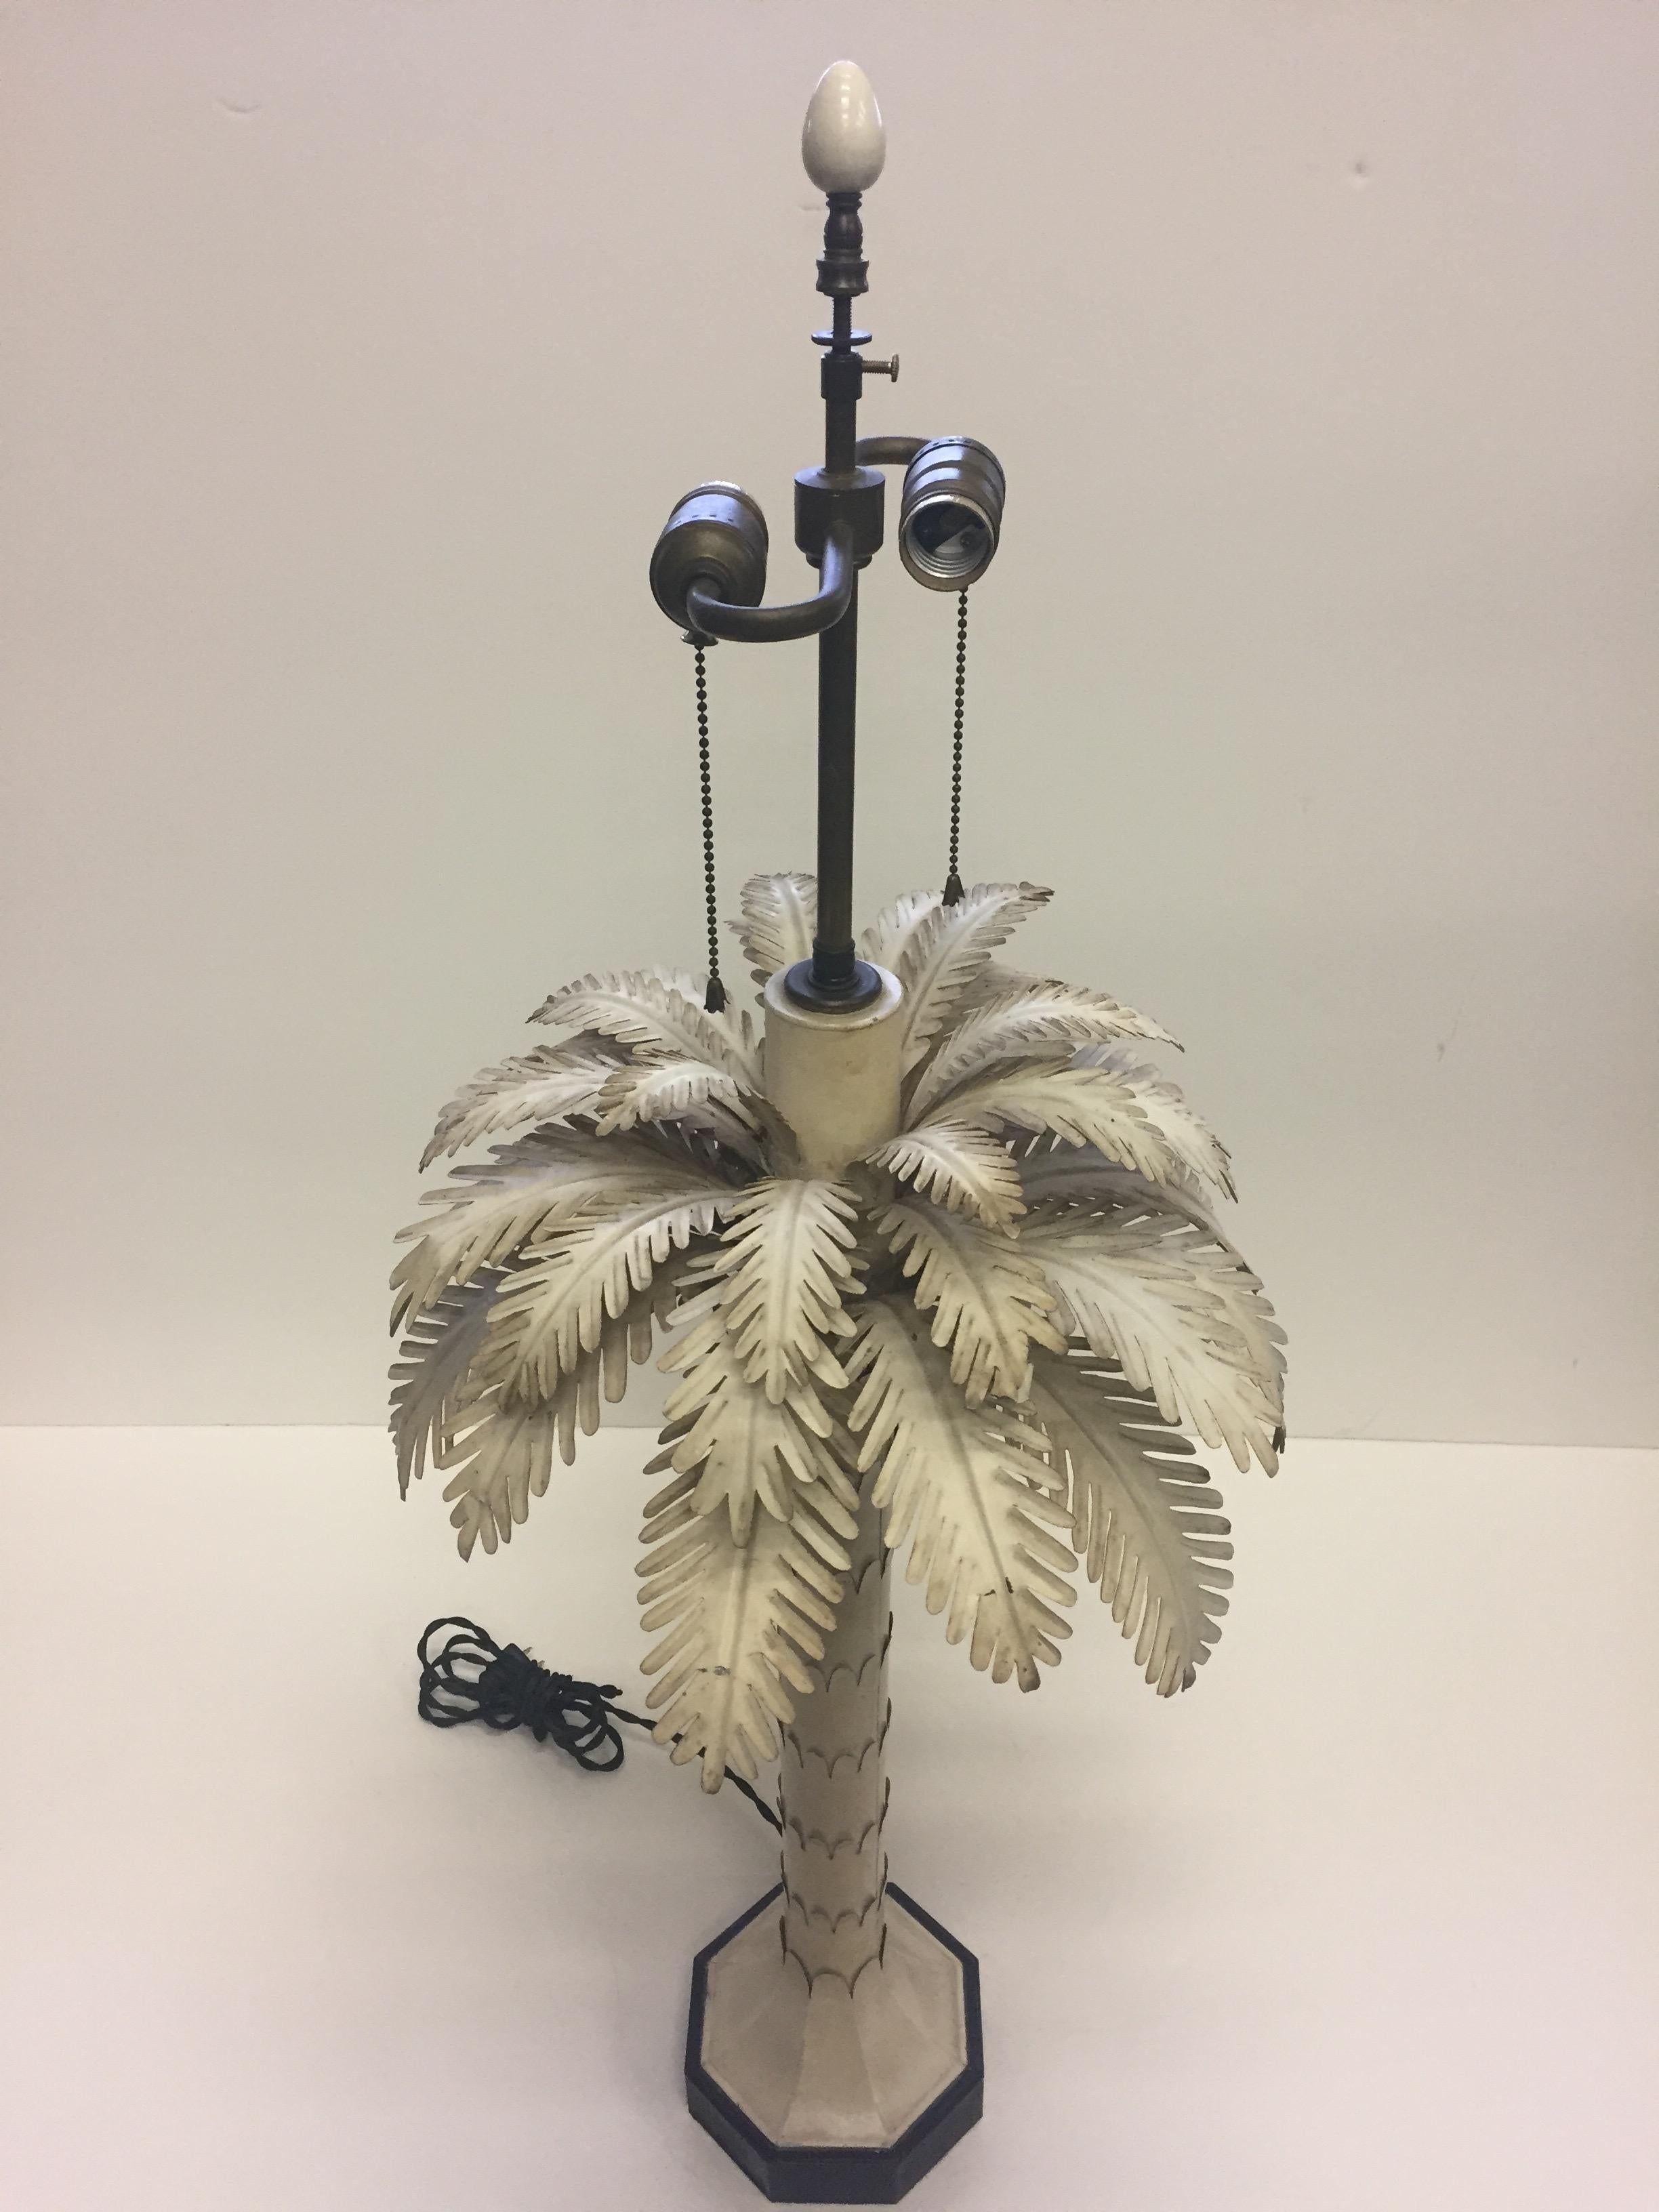 Glamorous tole table lamp painted cream having a mass of feathery palm leaves on top of a decorative tree trunky column.
2 60 watt sockets.
 